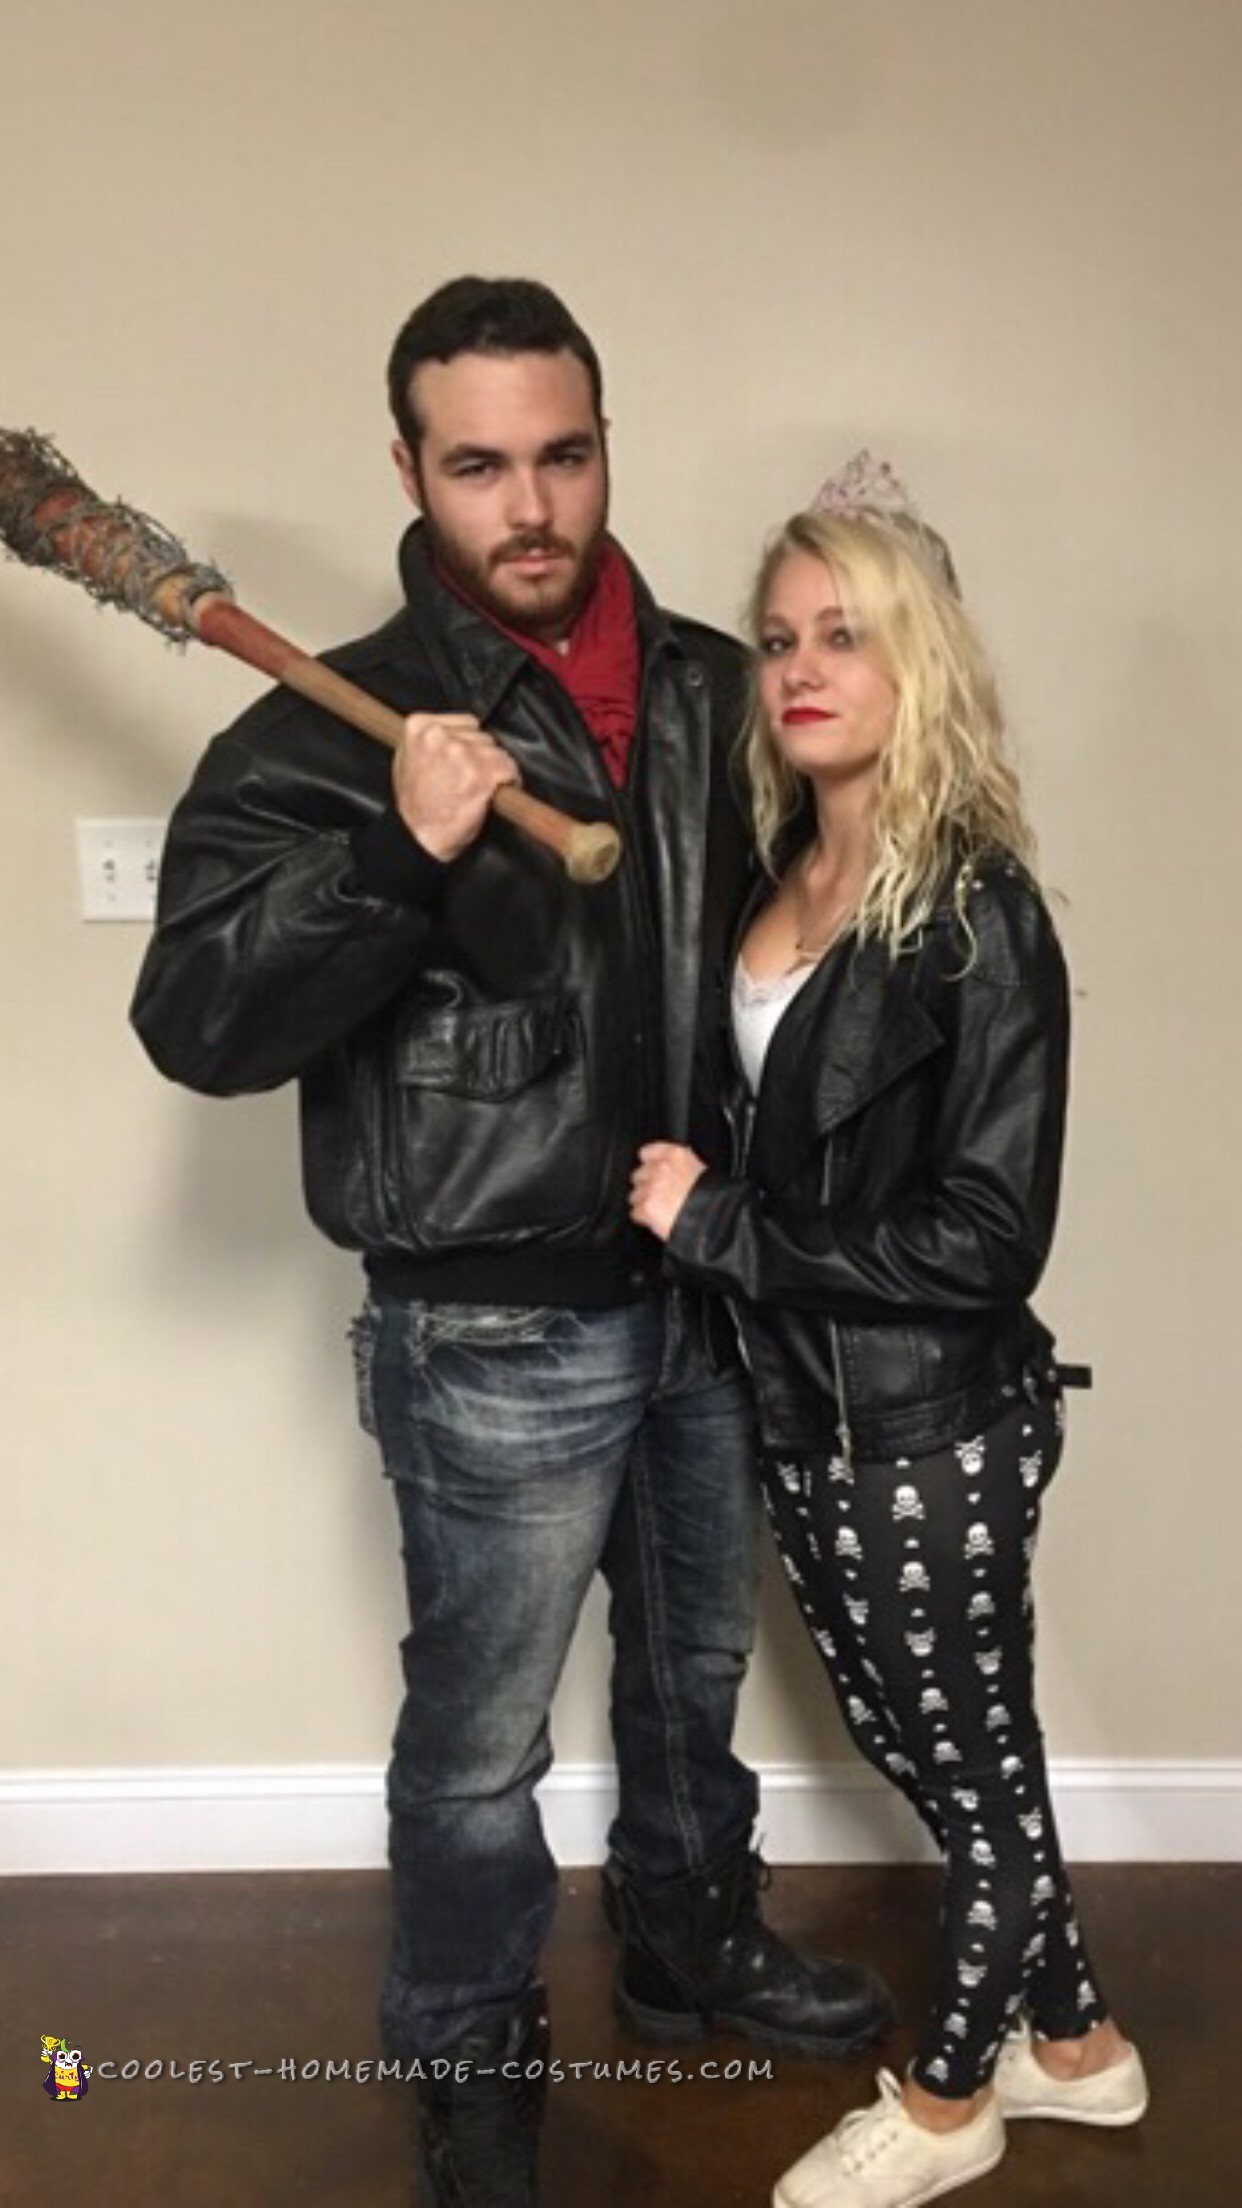 The Hot Negan and his Wife Couple Costume photo